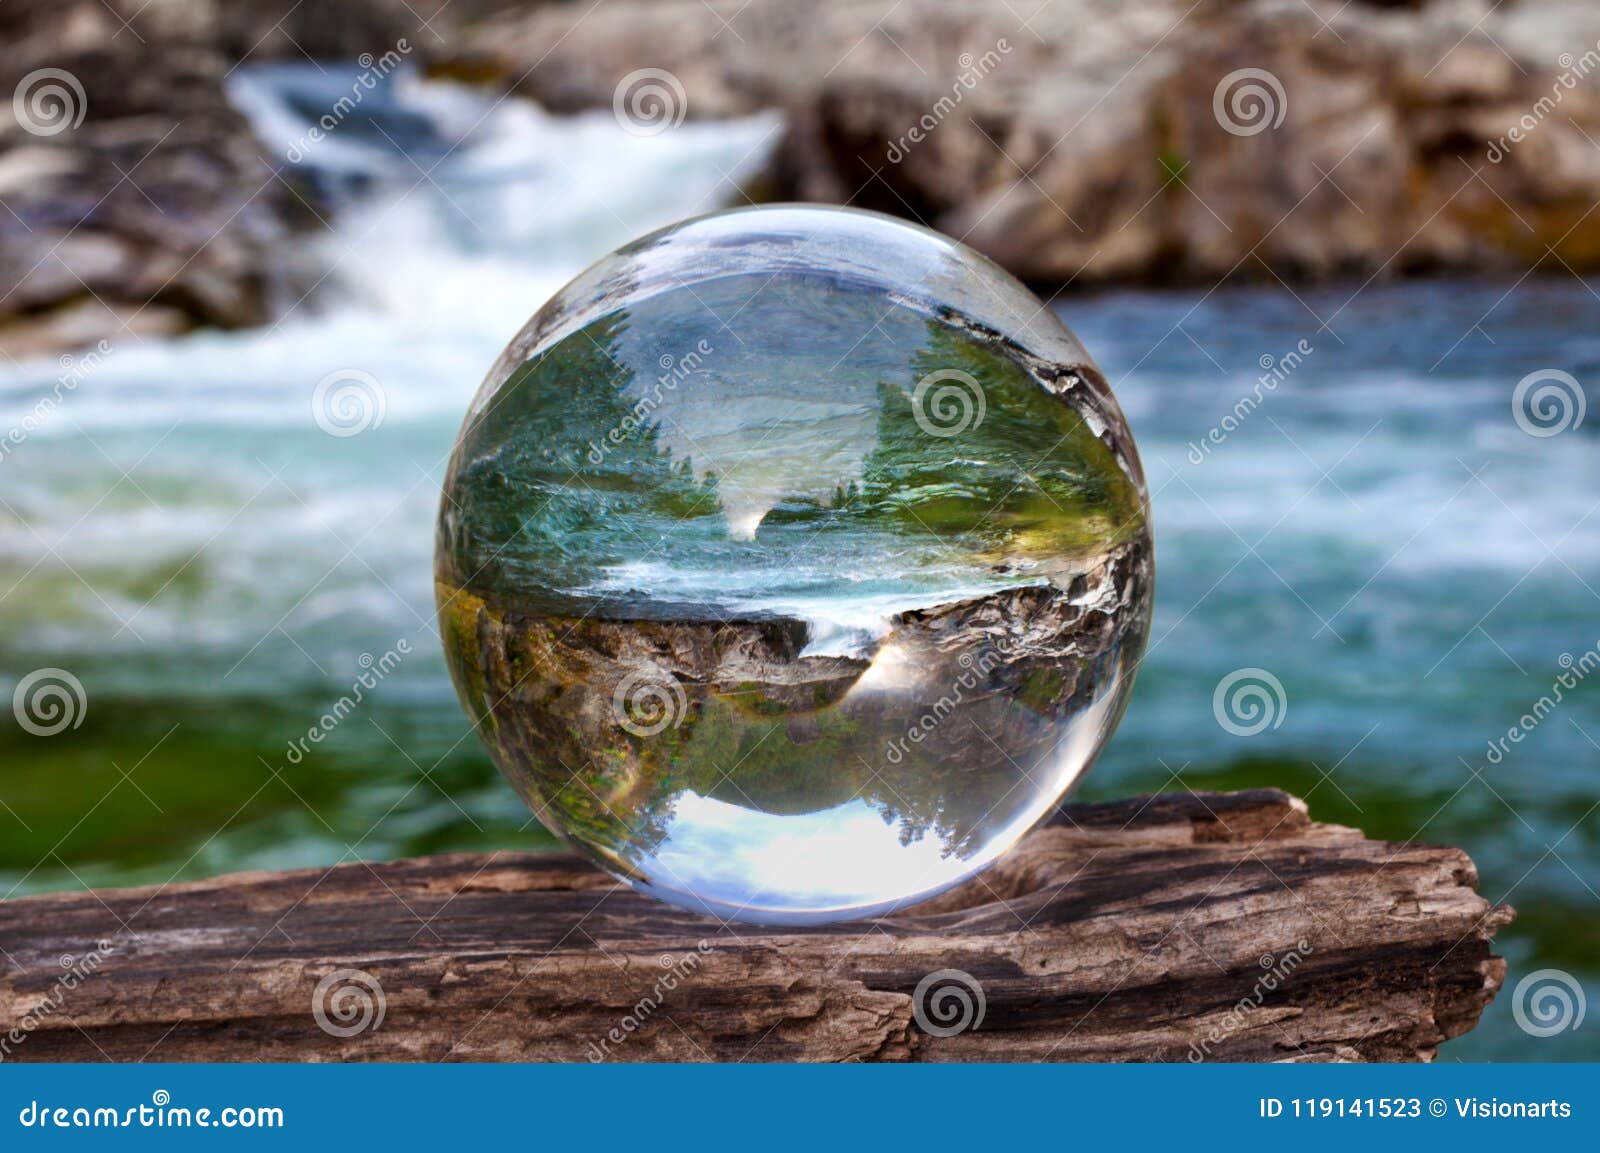 crystal glass ball sphere reveals waterfall landscape